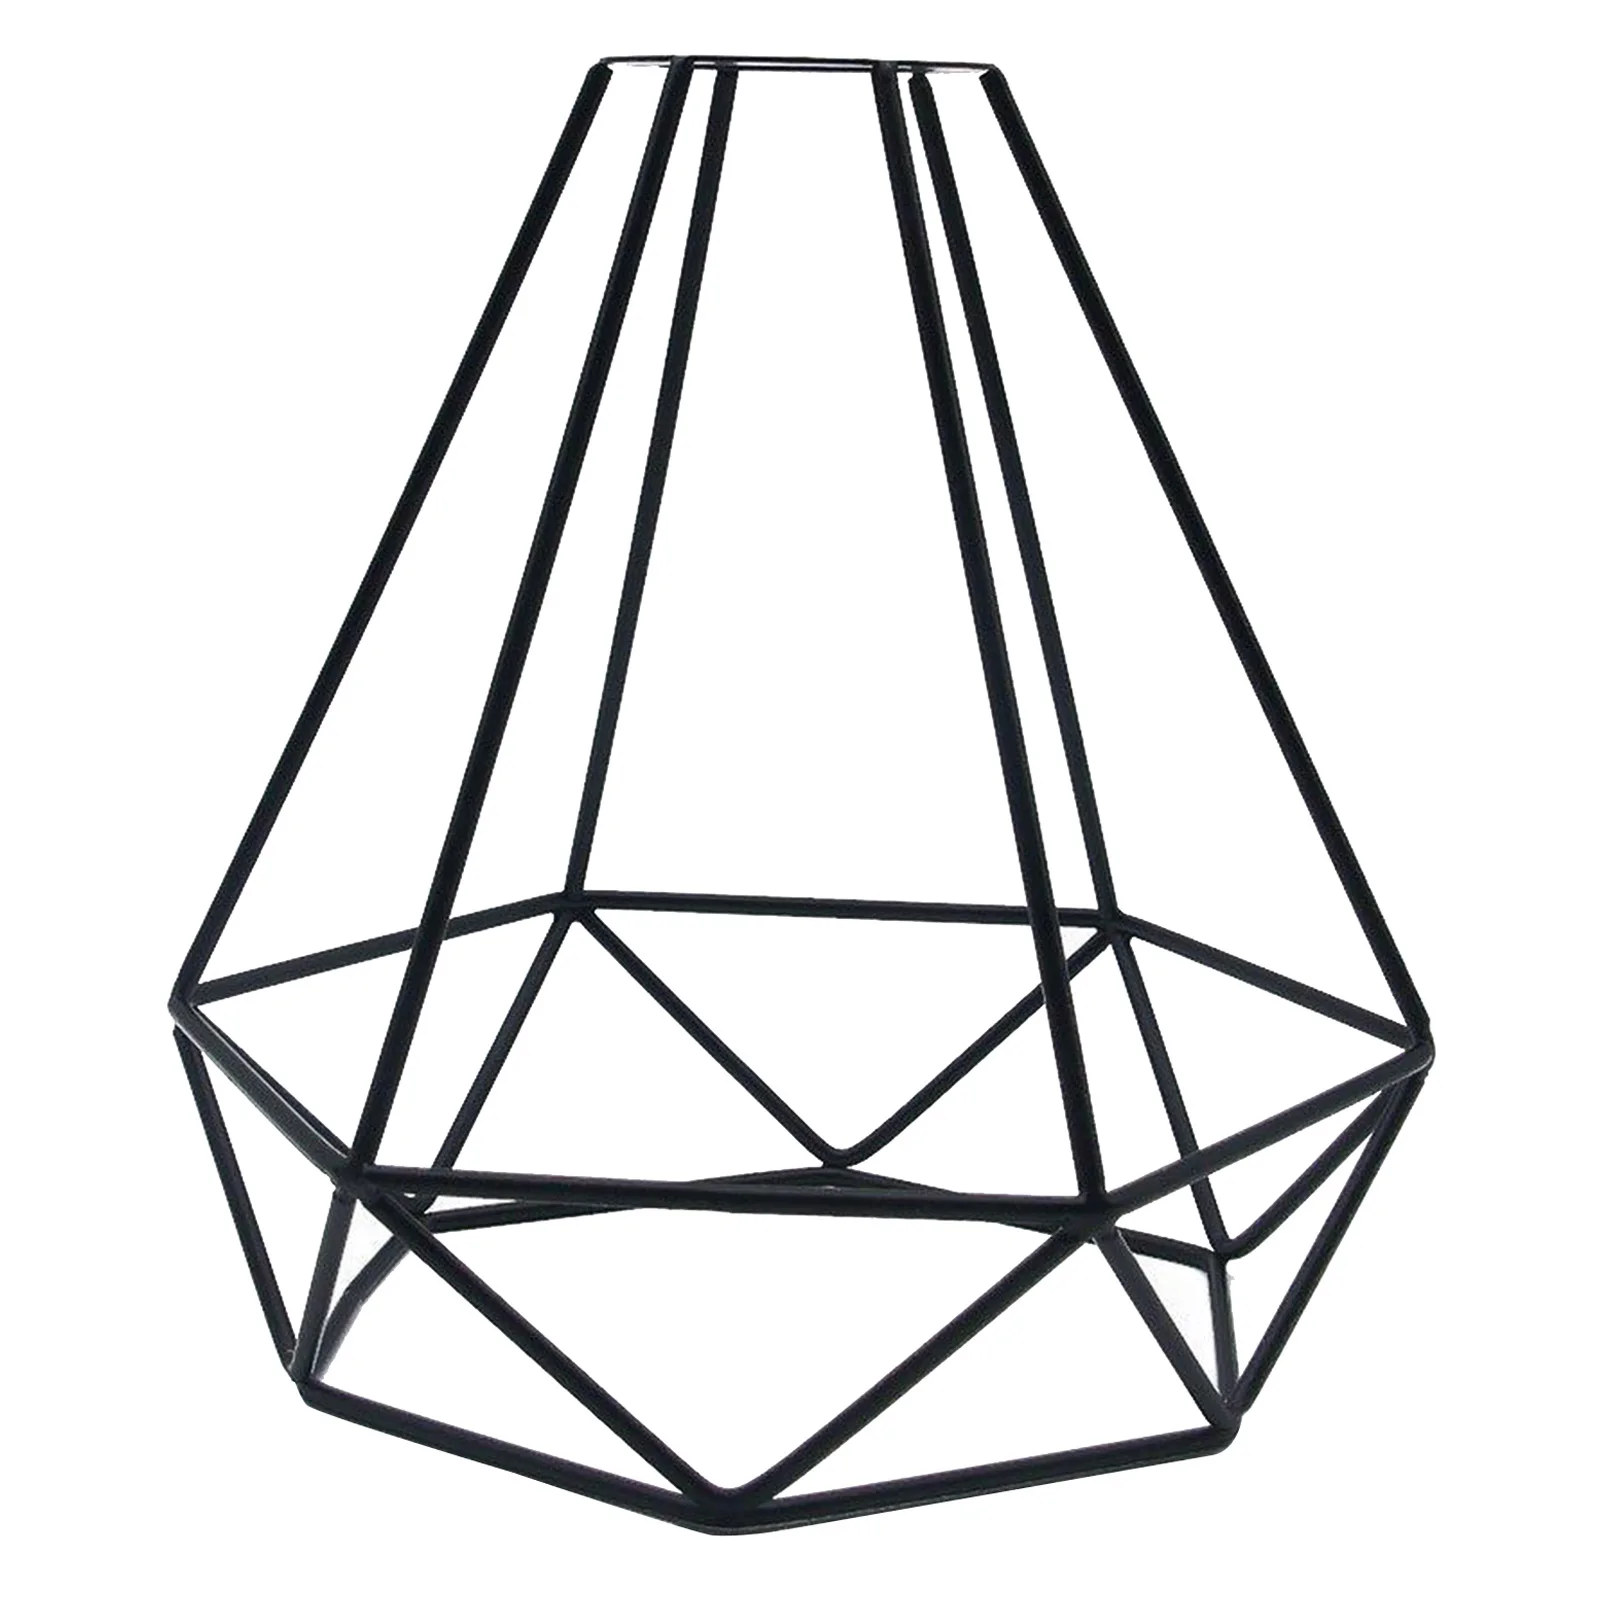 Lampshade Only Retro Metal Wire Cage Diamond Shaped Hanging Pendant Light Shade Chandelier Lamp Cover Without Bulb